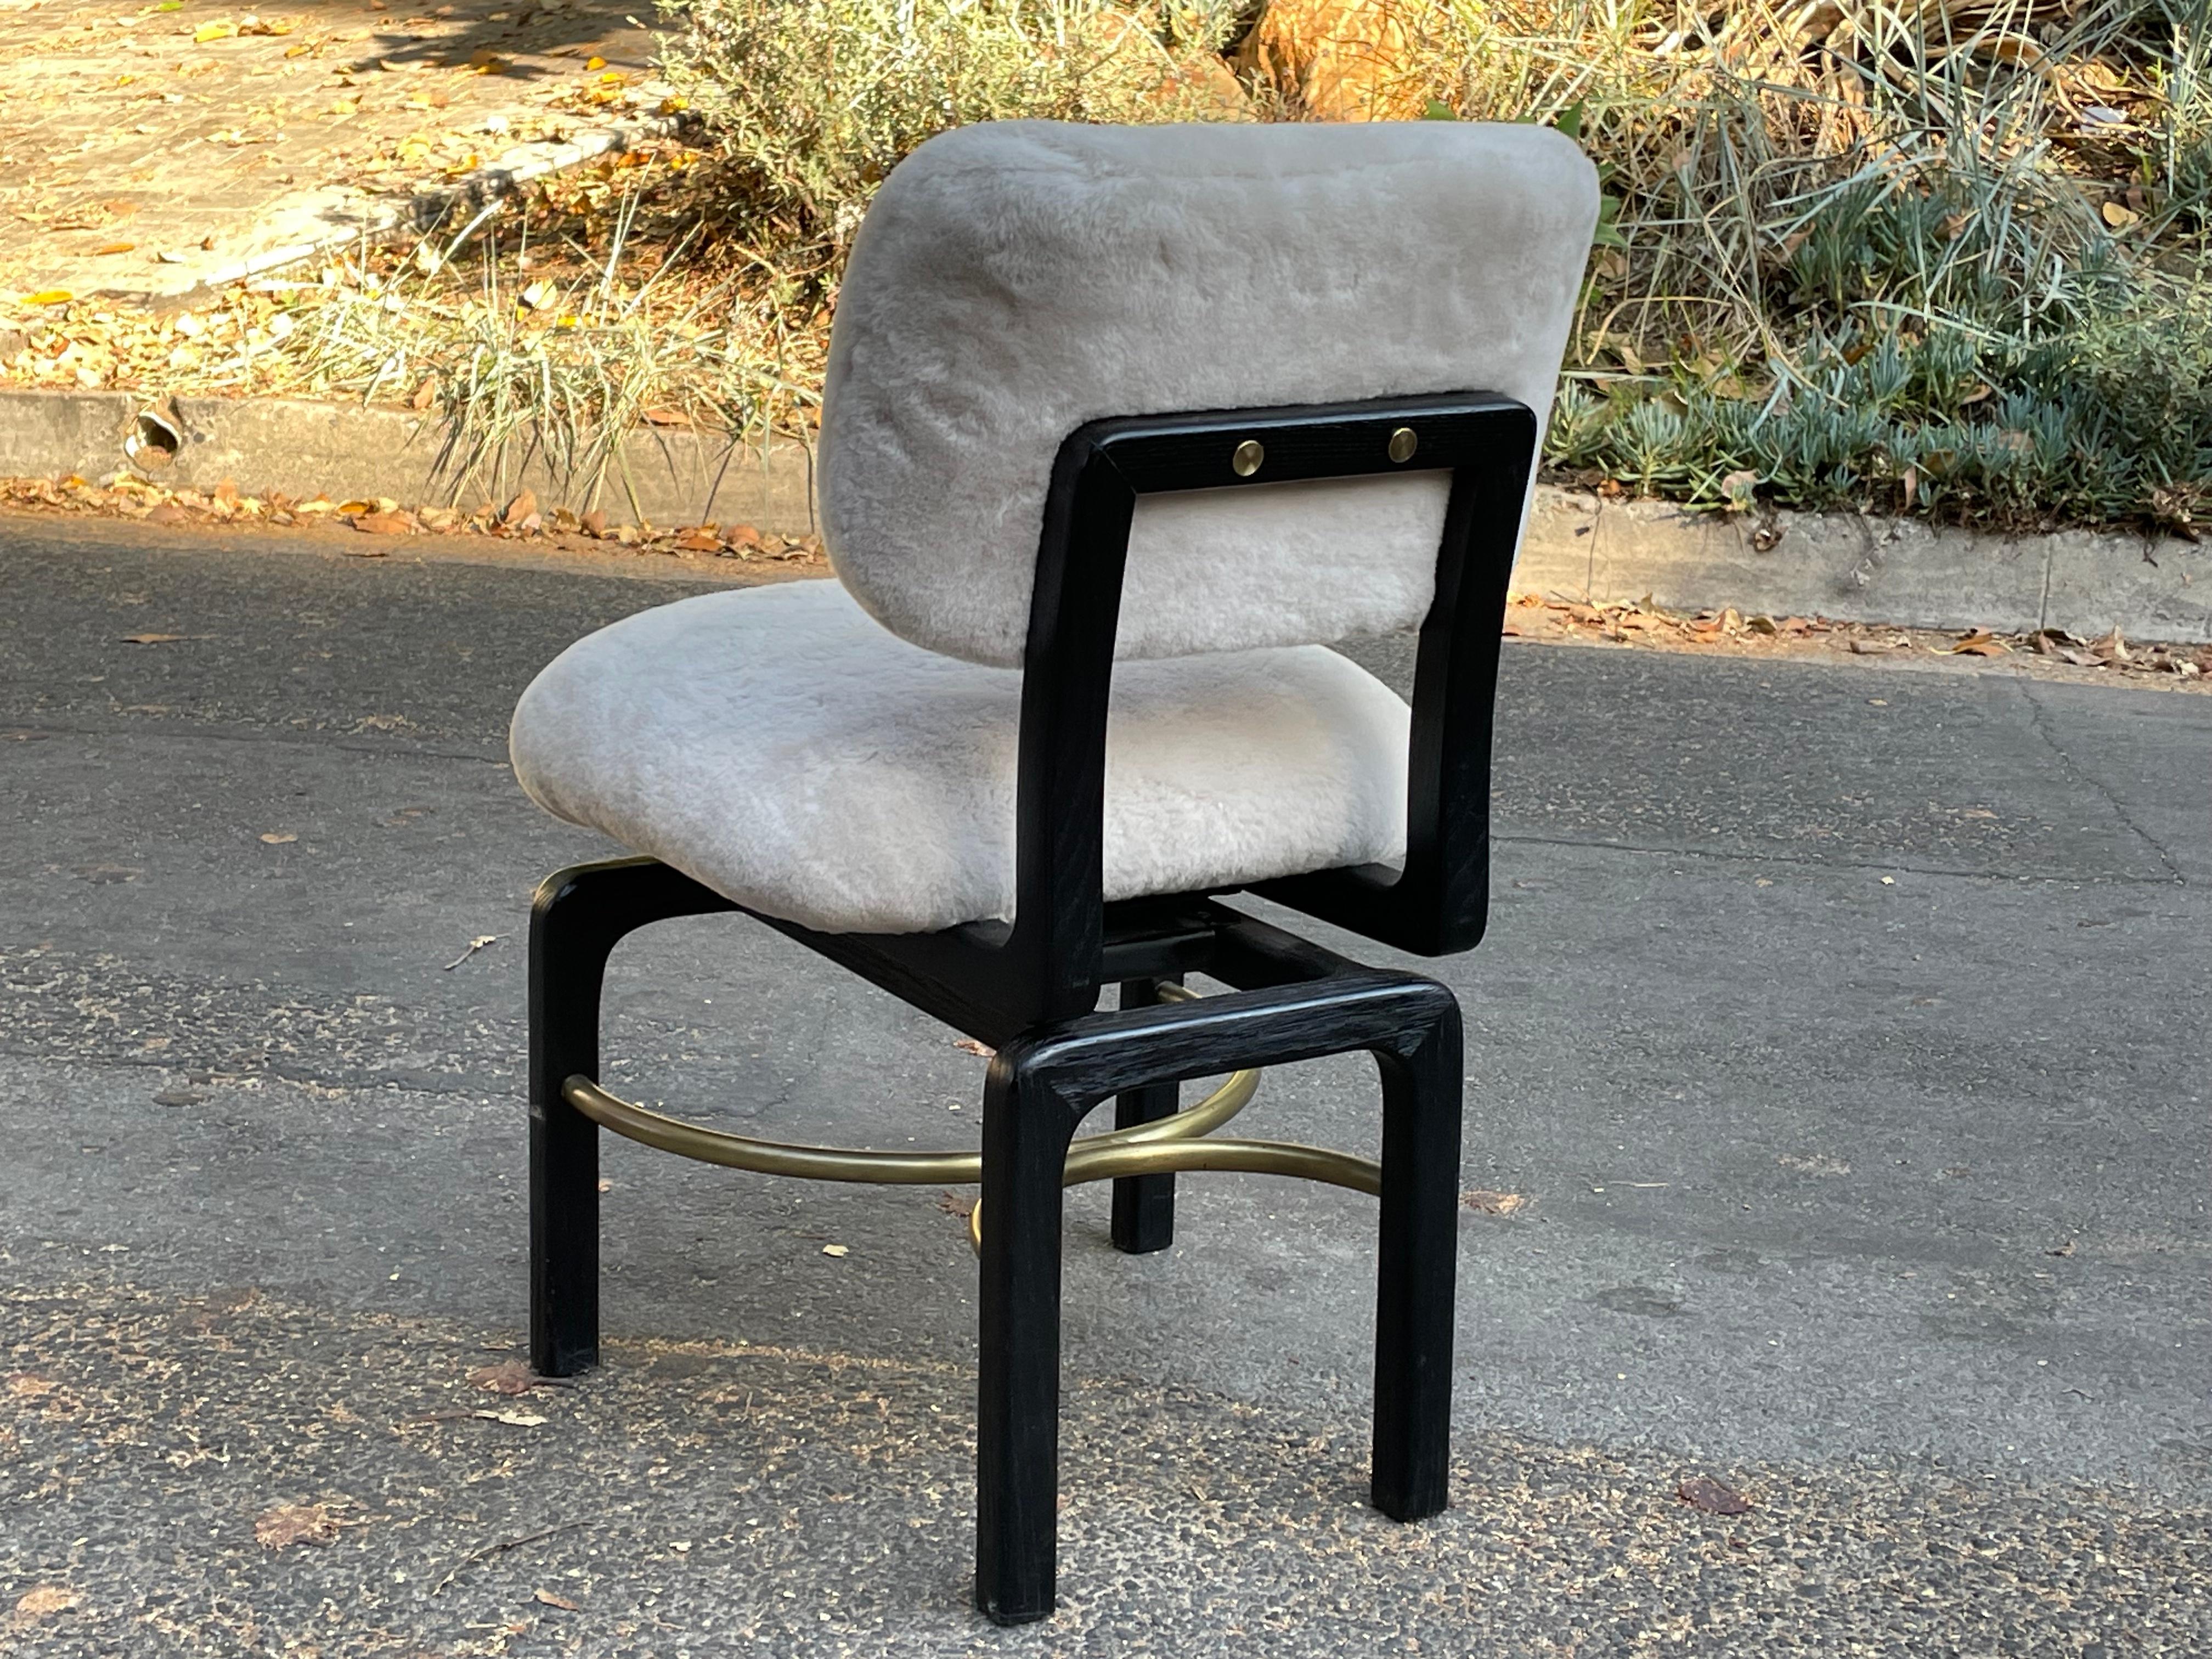 Stunning Thomas Hayes Studio custom designed swivel side chair upholstered in shearling on seat & back. Gorgeous black solid wood frame with brass stretchers.

Great lines on this chair.

Excellent original condition. Mint. See photos.

Dimensions: